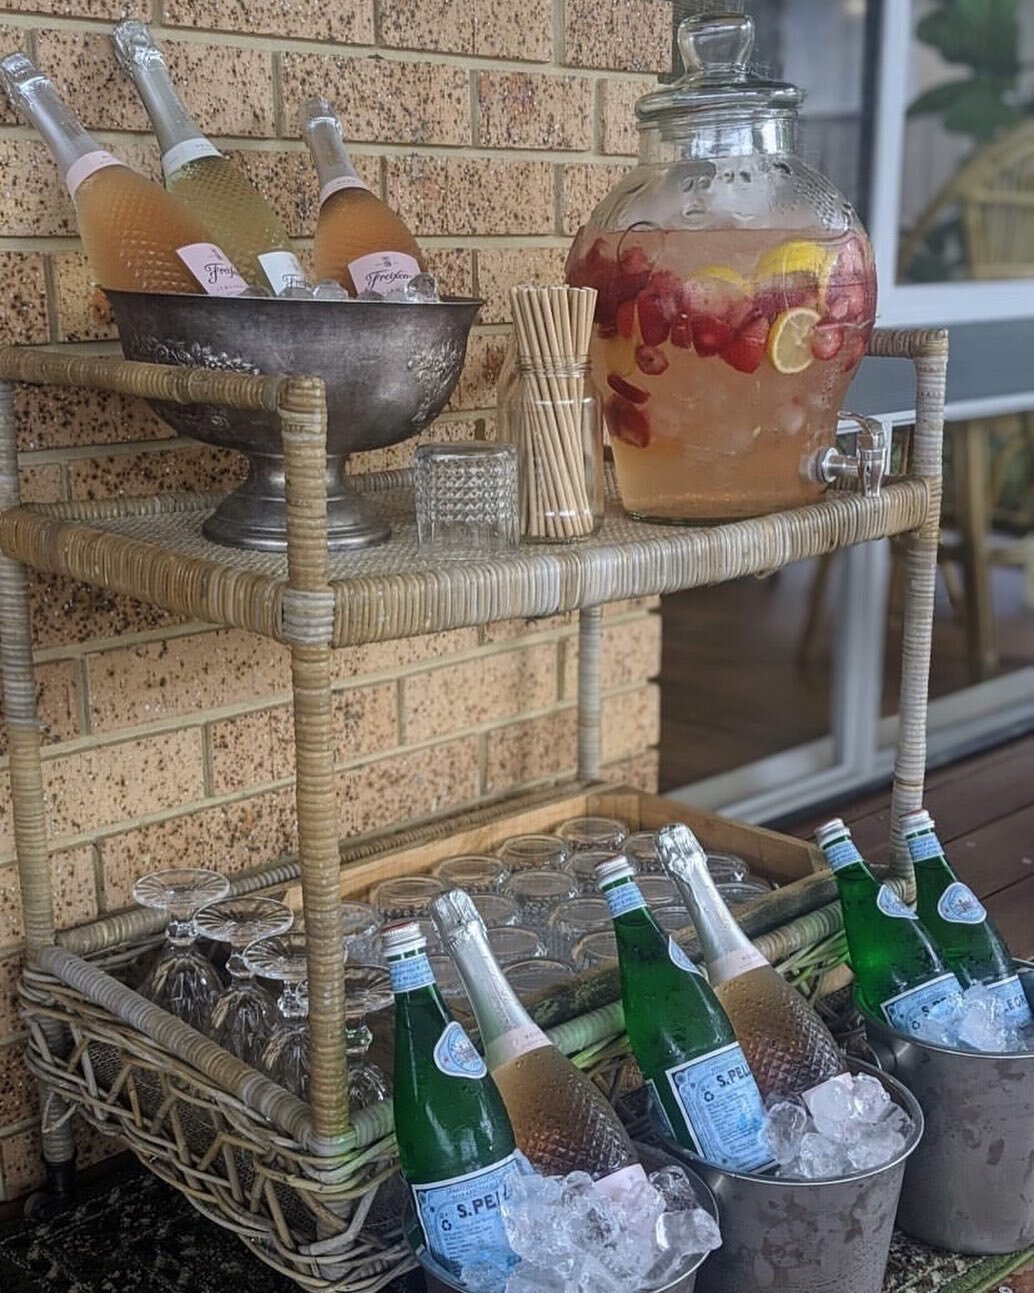 I have so many favourite pieces in our hire collection but this ice bucket and drinks trolley are definitely up there on the list 🏵🍾🥂 #partyhire #icebuckets #  #drinkstation #drinkstrolley #cheers #celebration #centralcoastnsw #popthechampagne #br